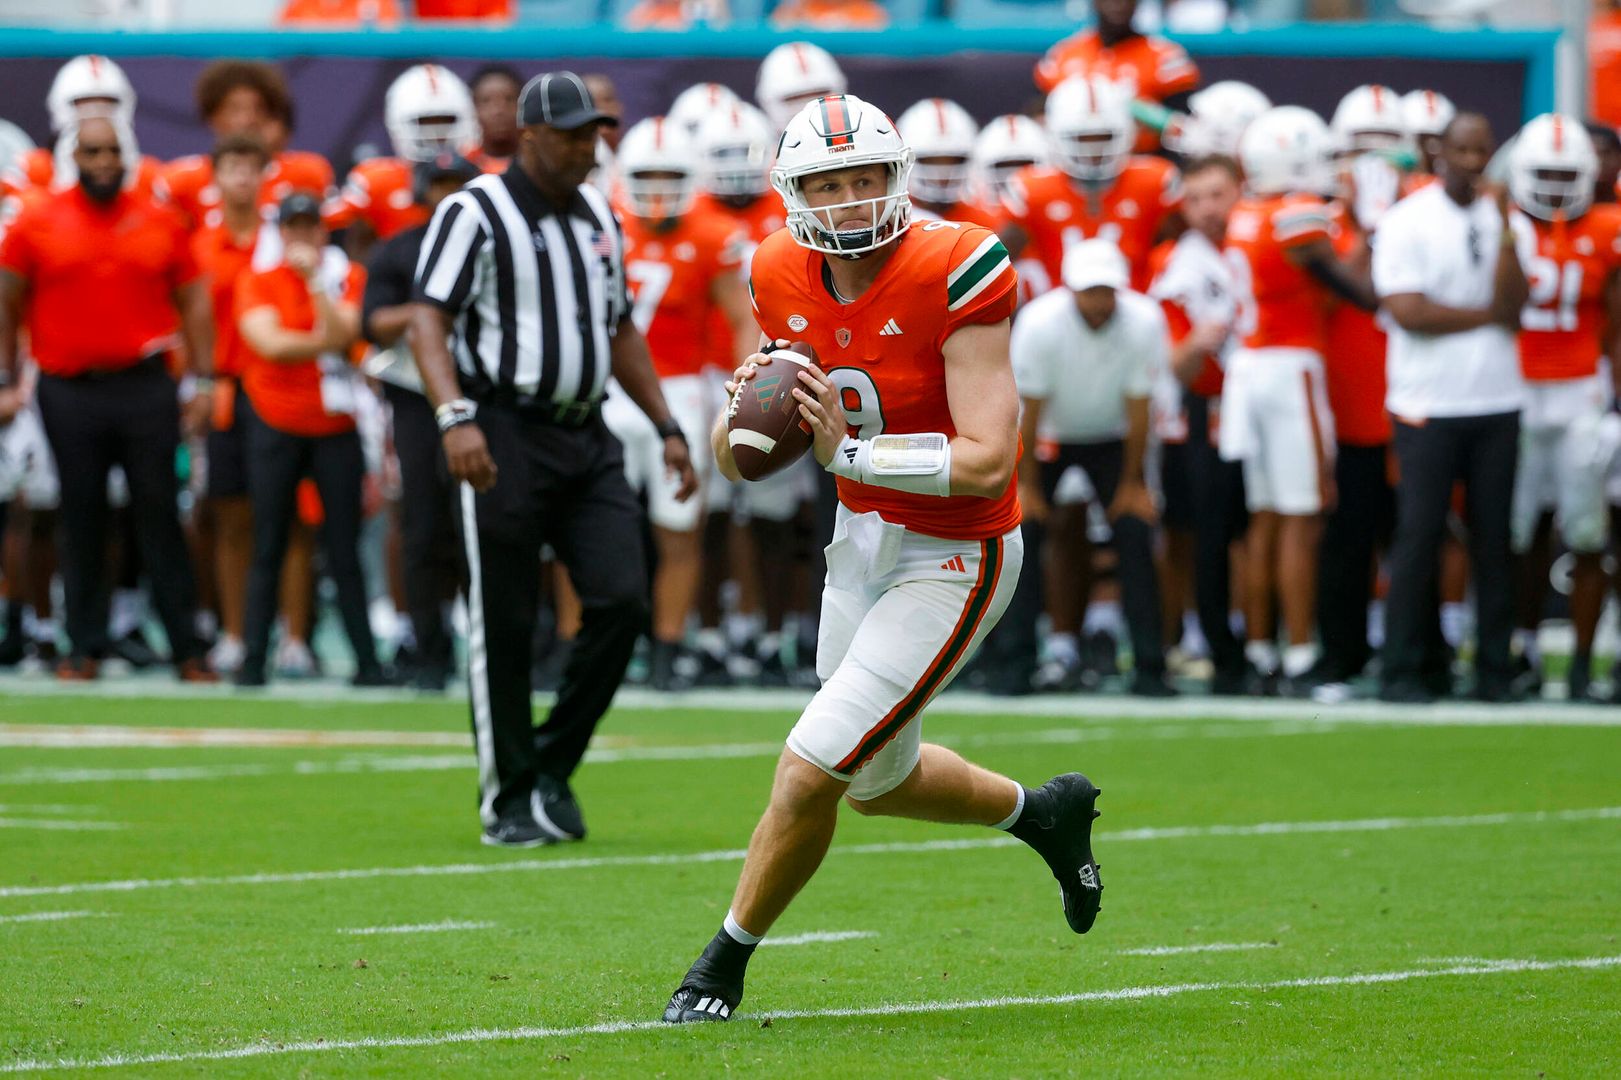 Canes Roll Past Aggies in Statement Win